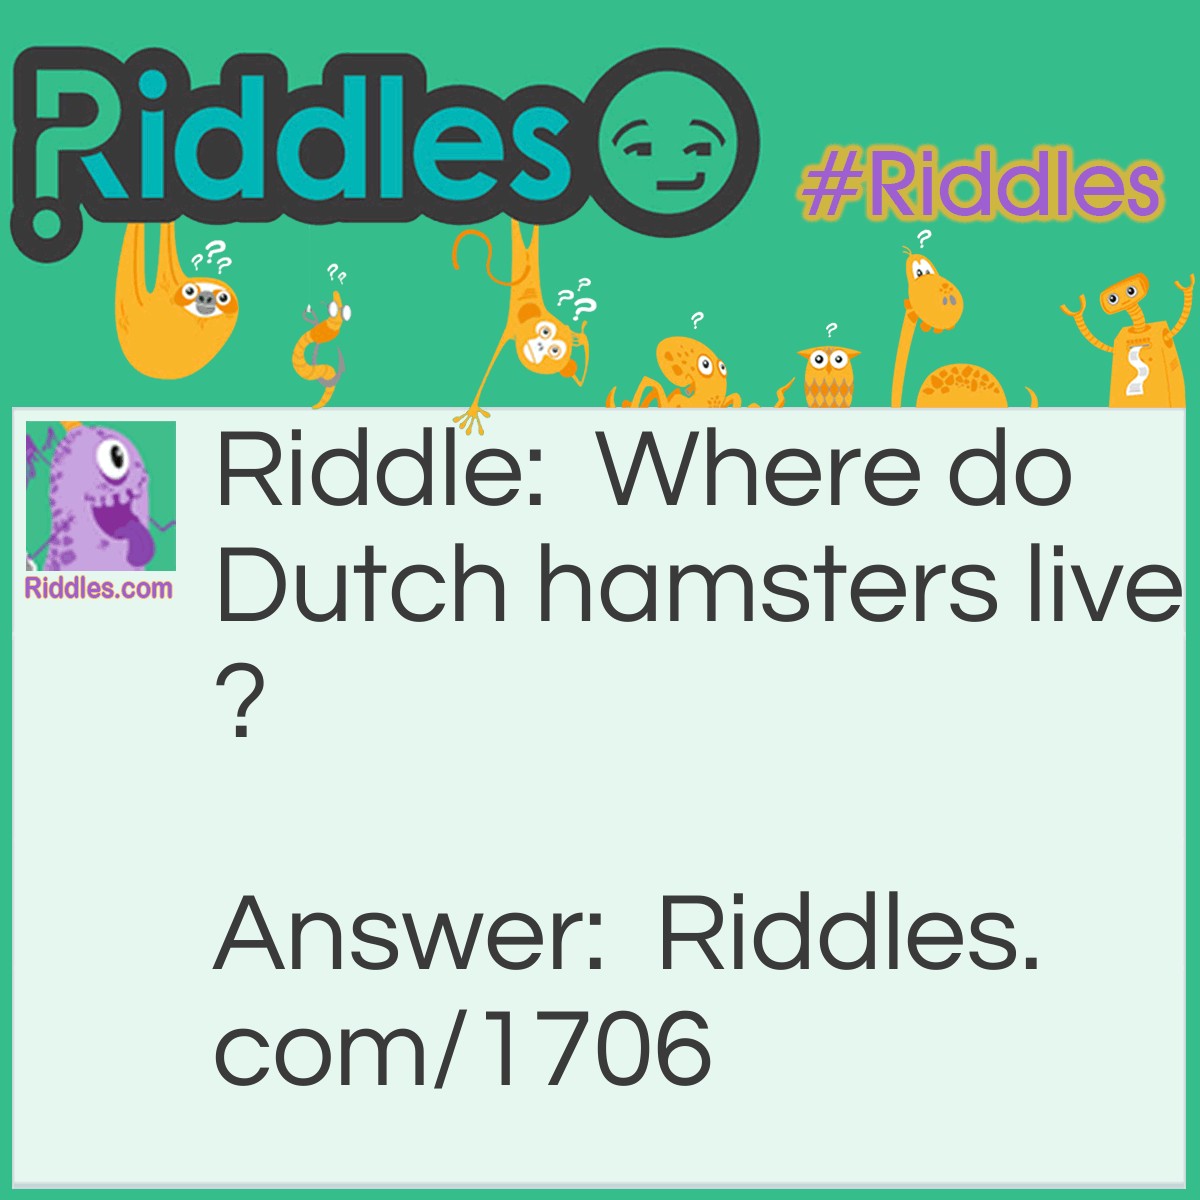 Riddle: Where do Dutch hamsters live? Answer: In Hamsterdam.